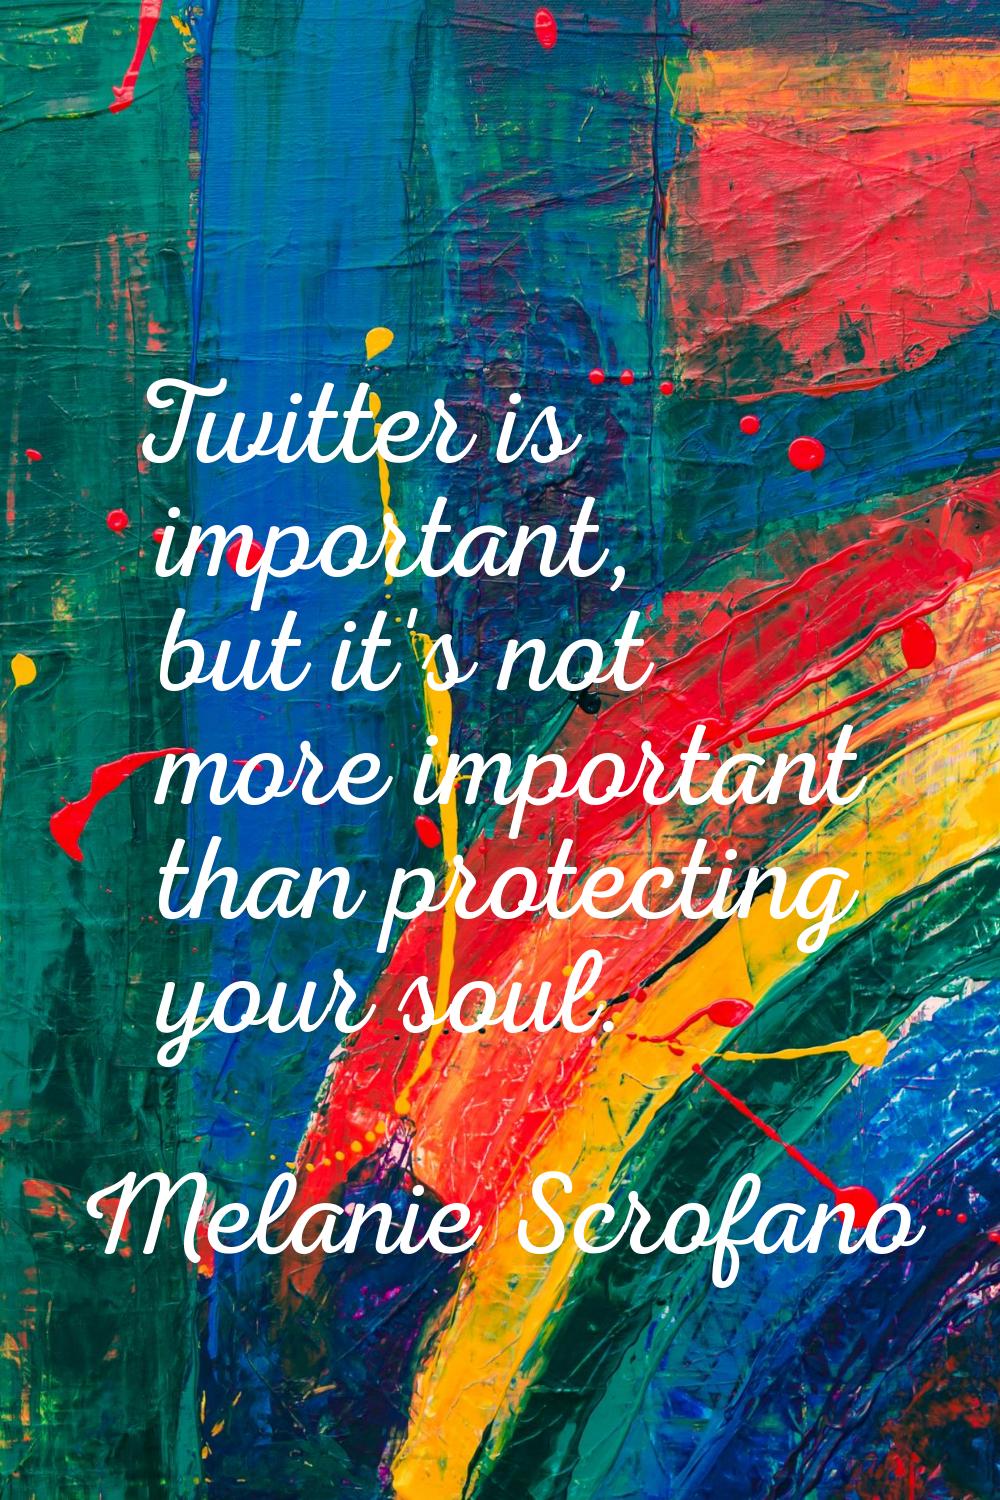 Twitter is important, but it's not more important than protecting your soul.